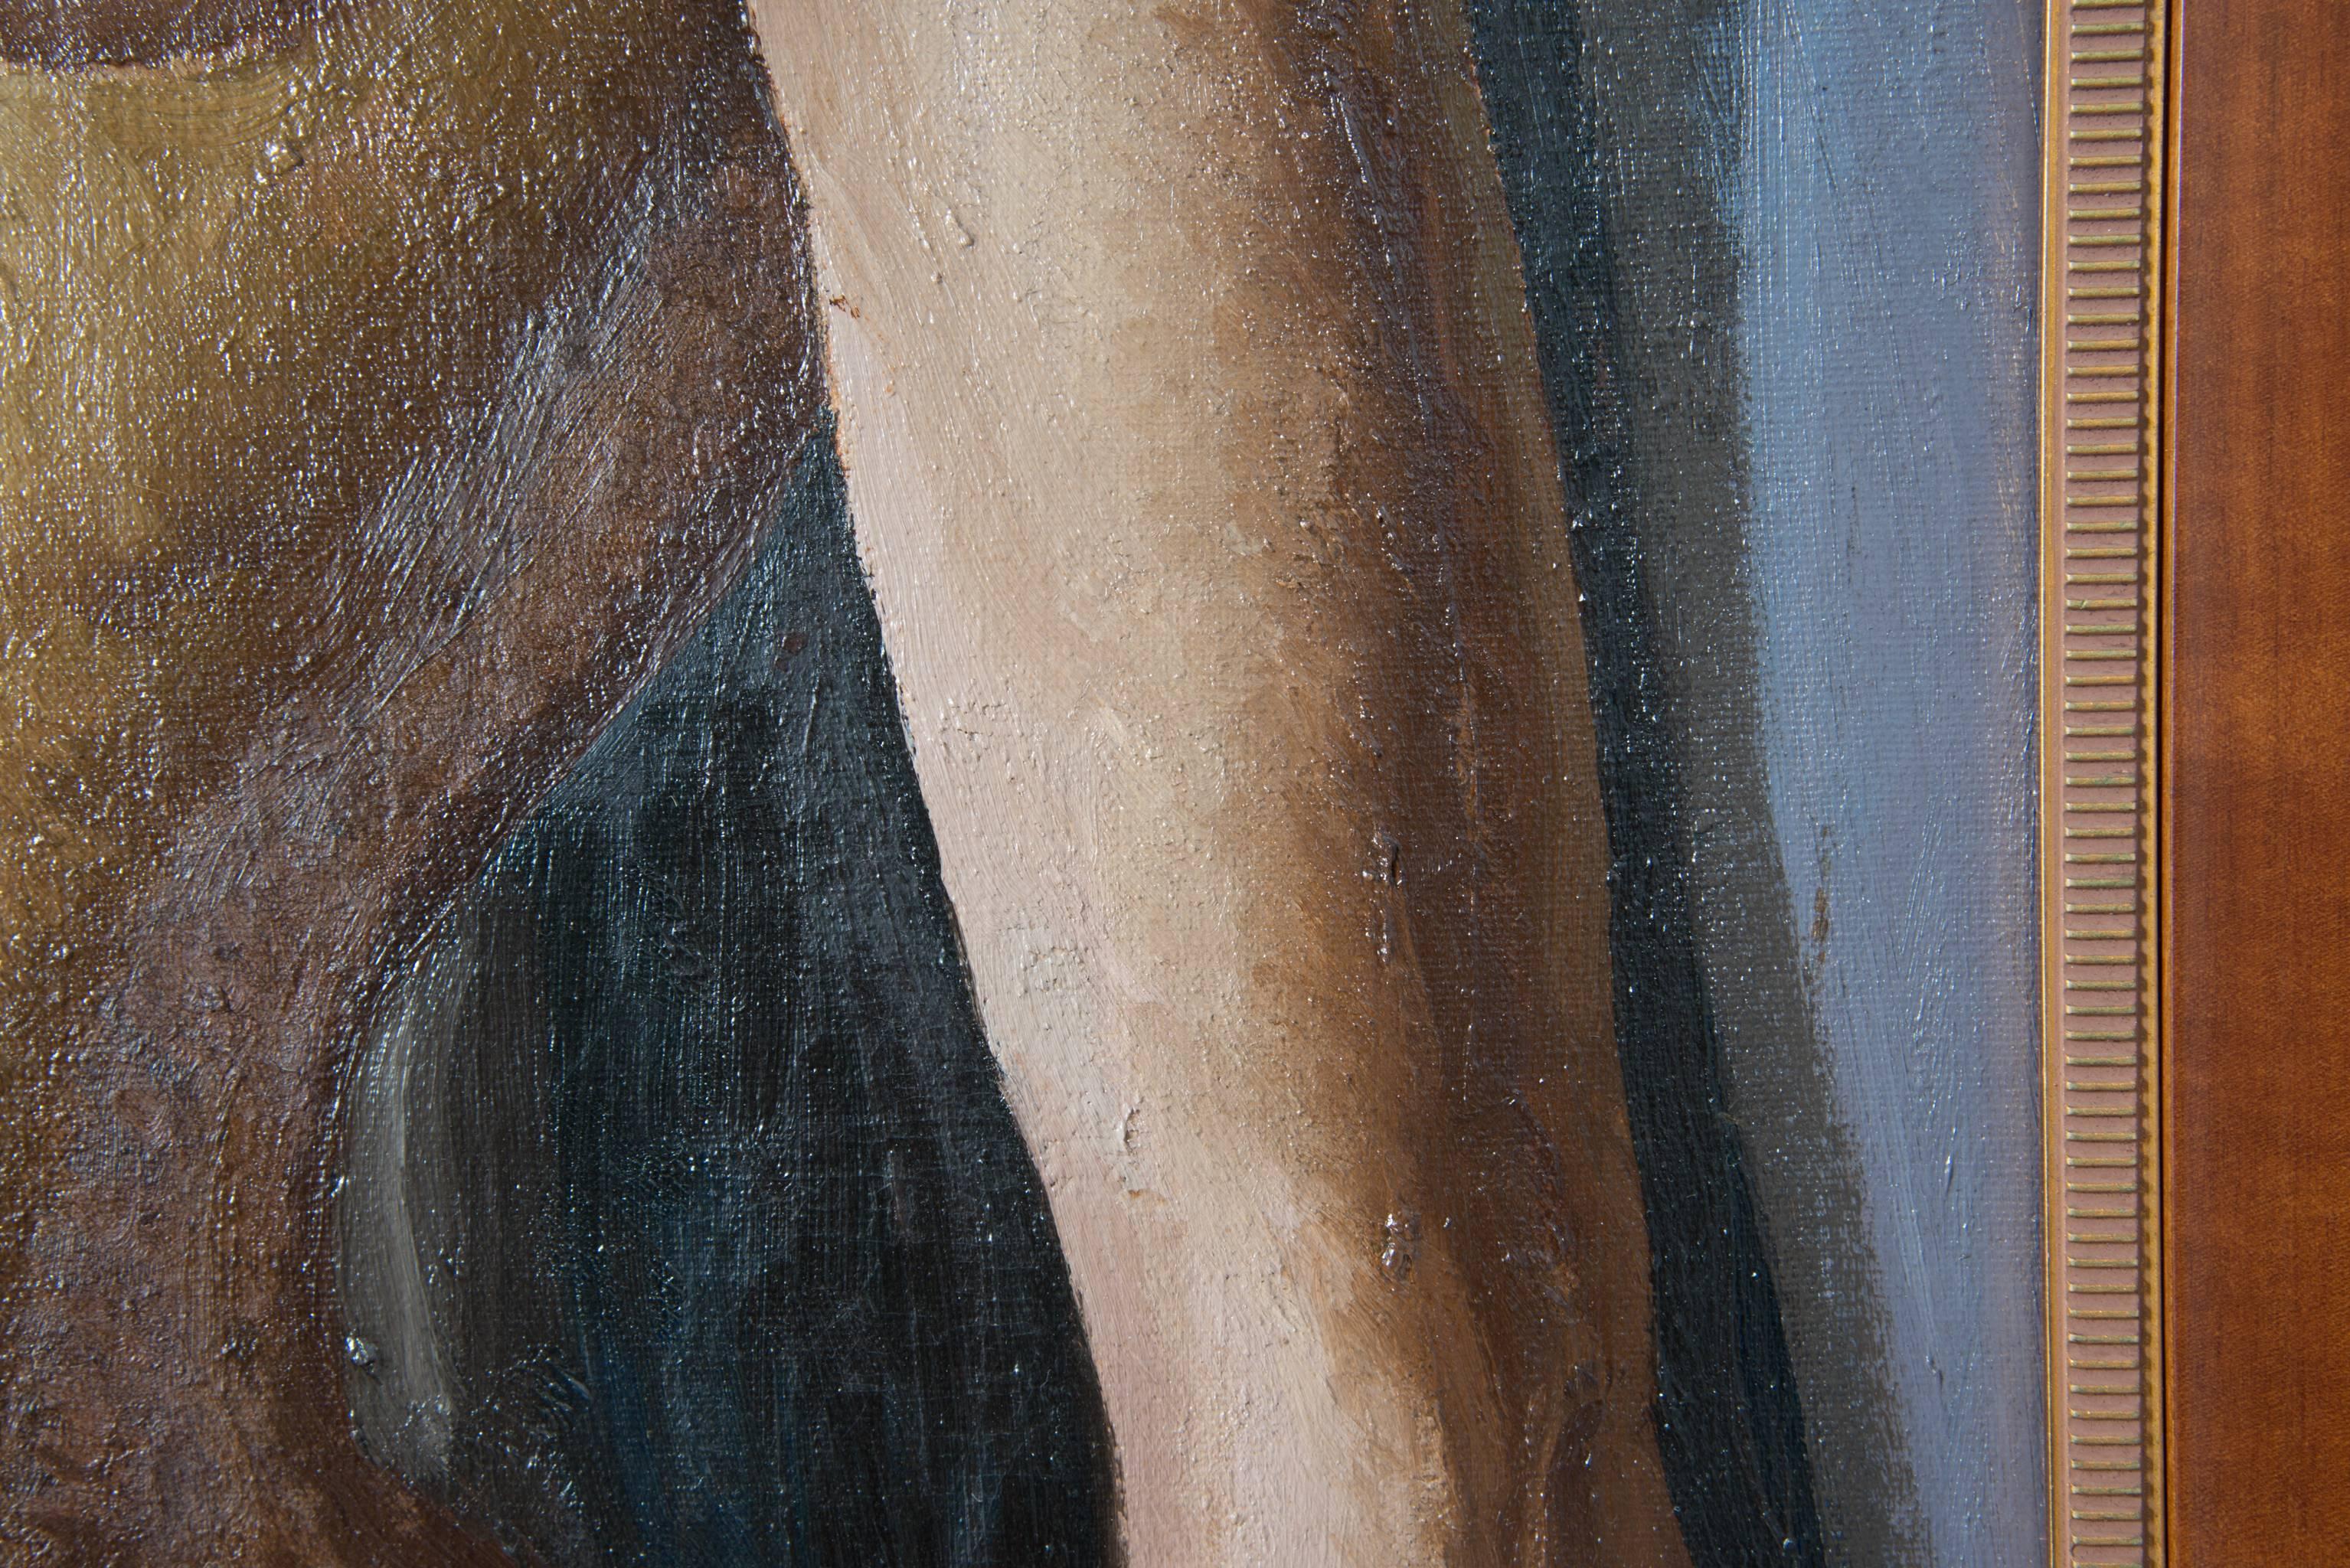 This oil on canvas depicting a nude female leaning against a gray wall was painted in the 1930s by the listed, American artist Mabel Kaiser Saloomey (b.1908) and is signed in the upper left-hand corner of the canvas.

The artist has used earth-tones